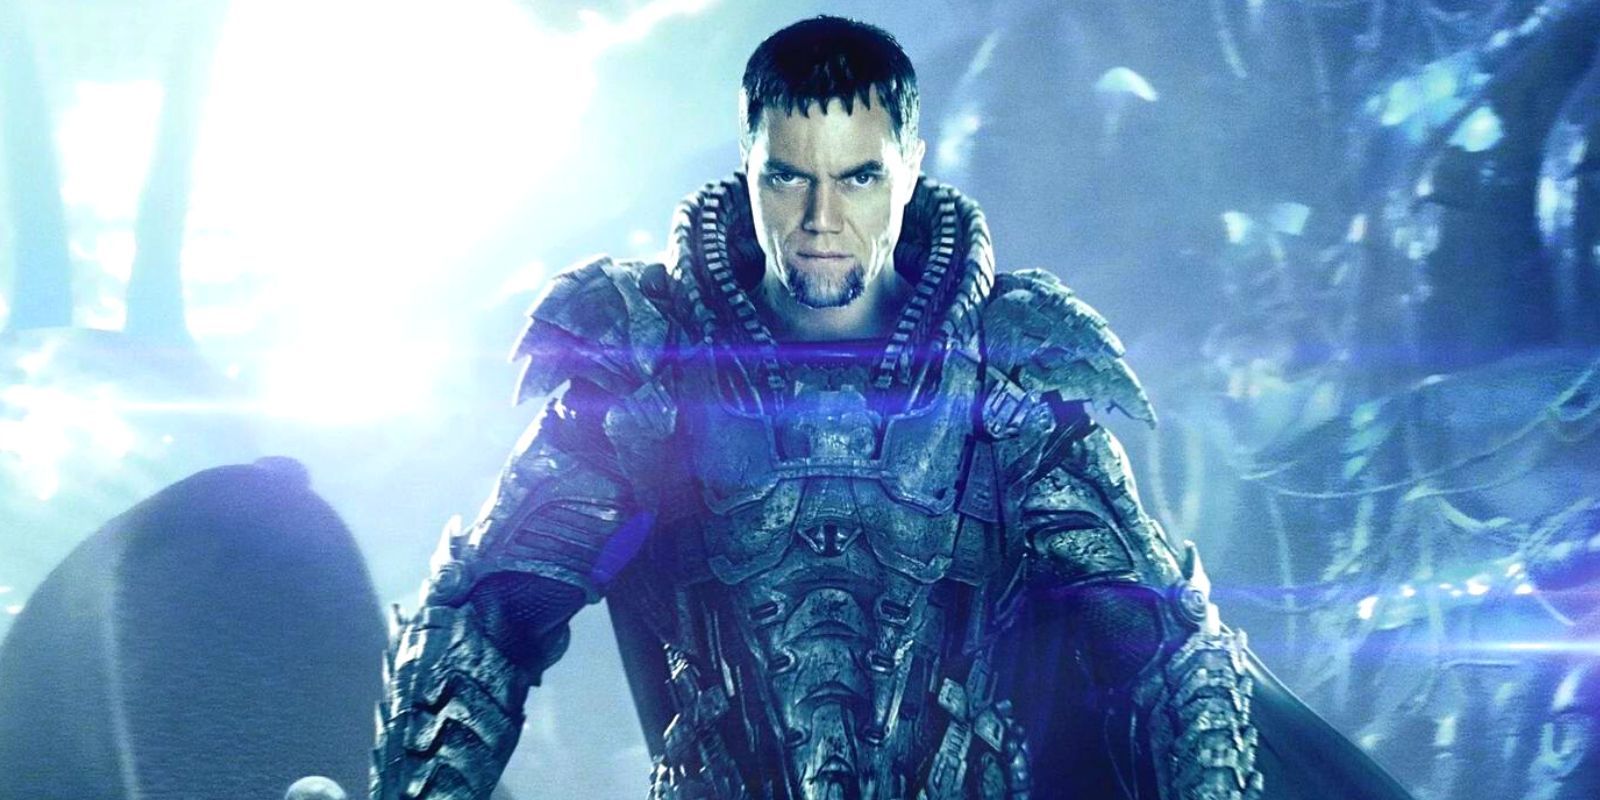 General Zod in full armor, standing with a blinding light behind him